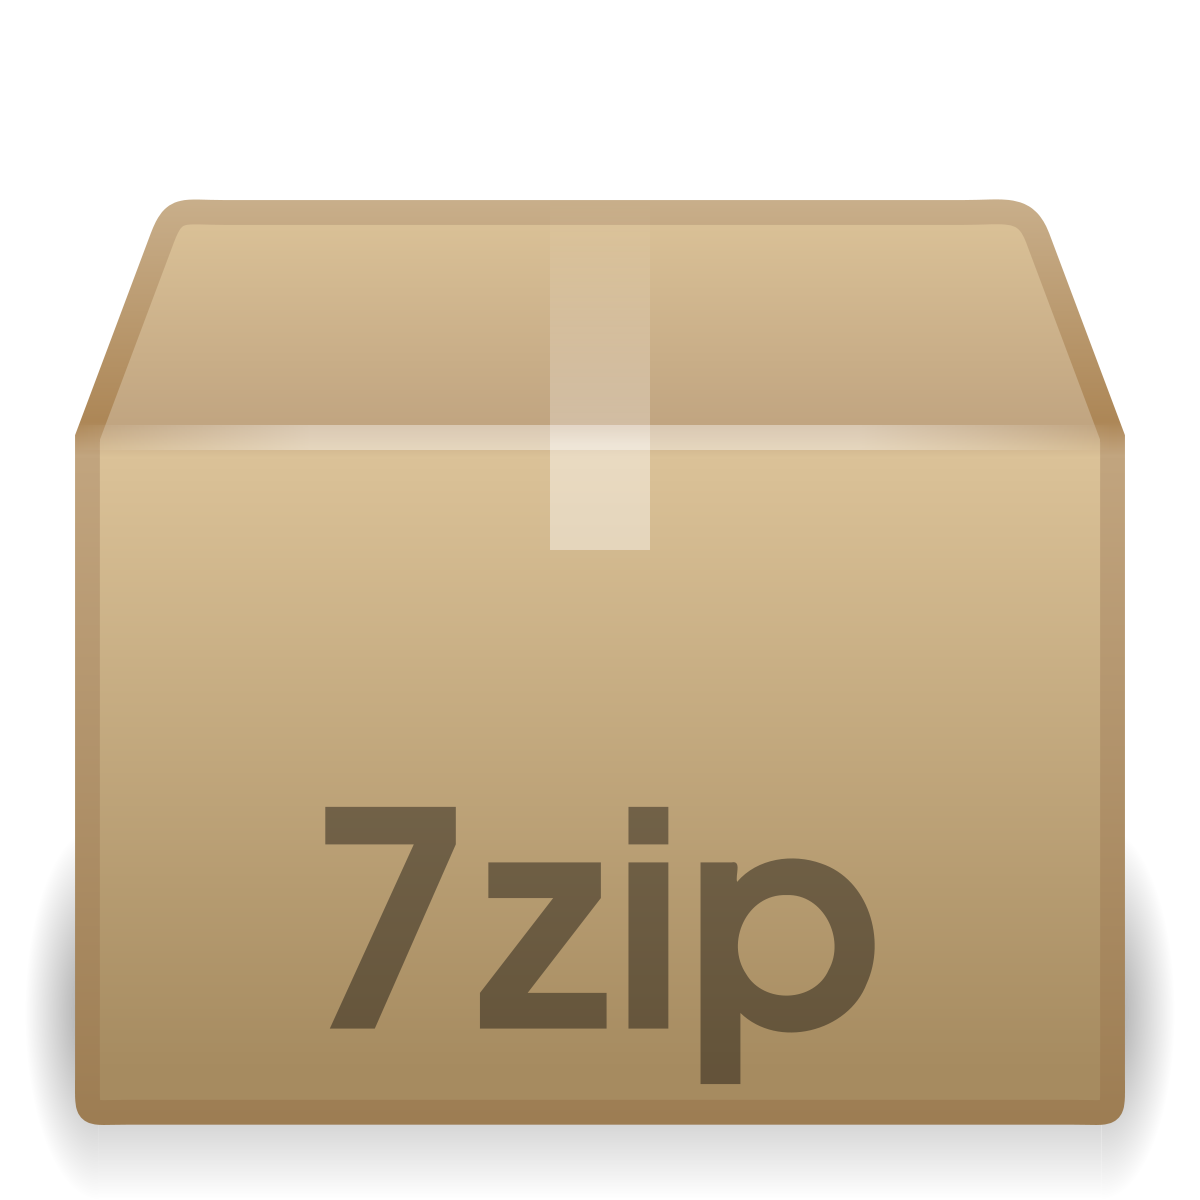 what is a 7z file type